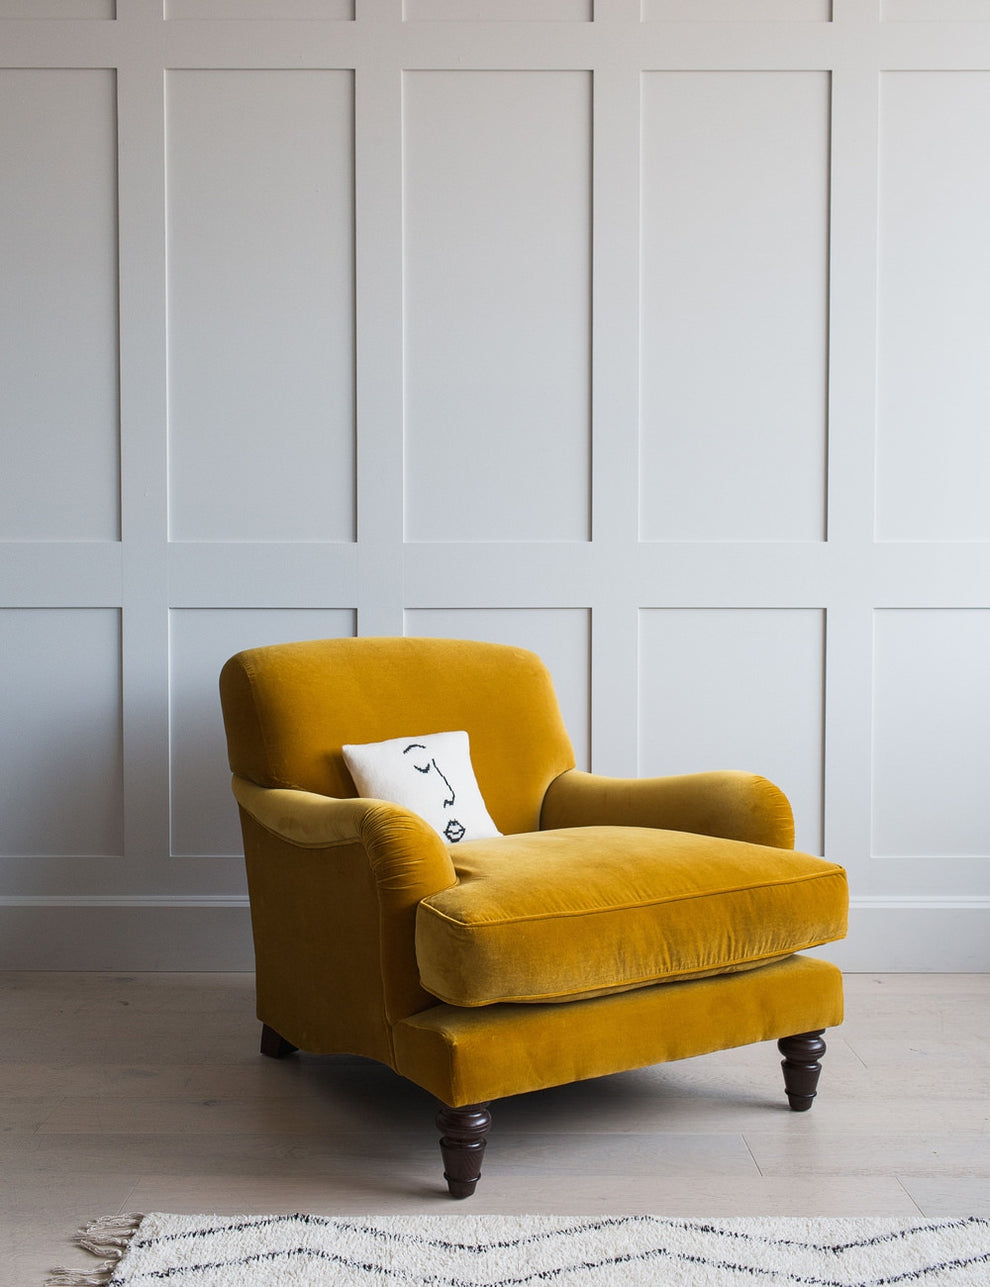 Mabel Armchair